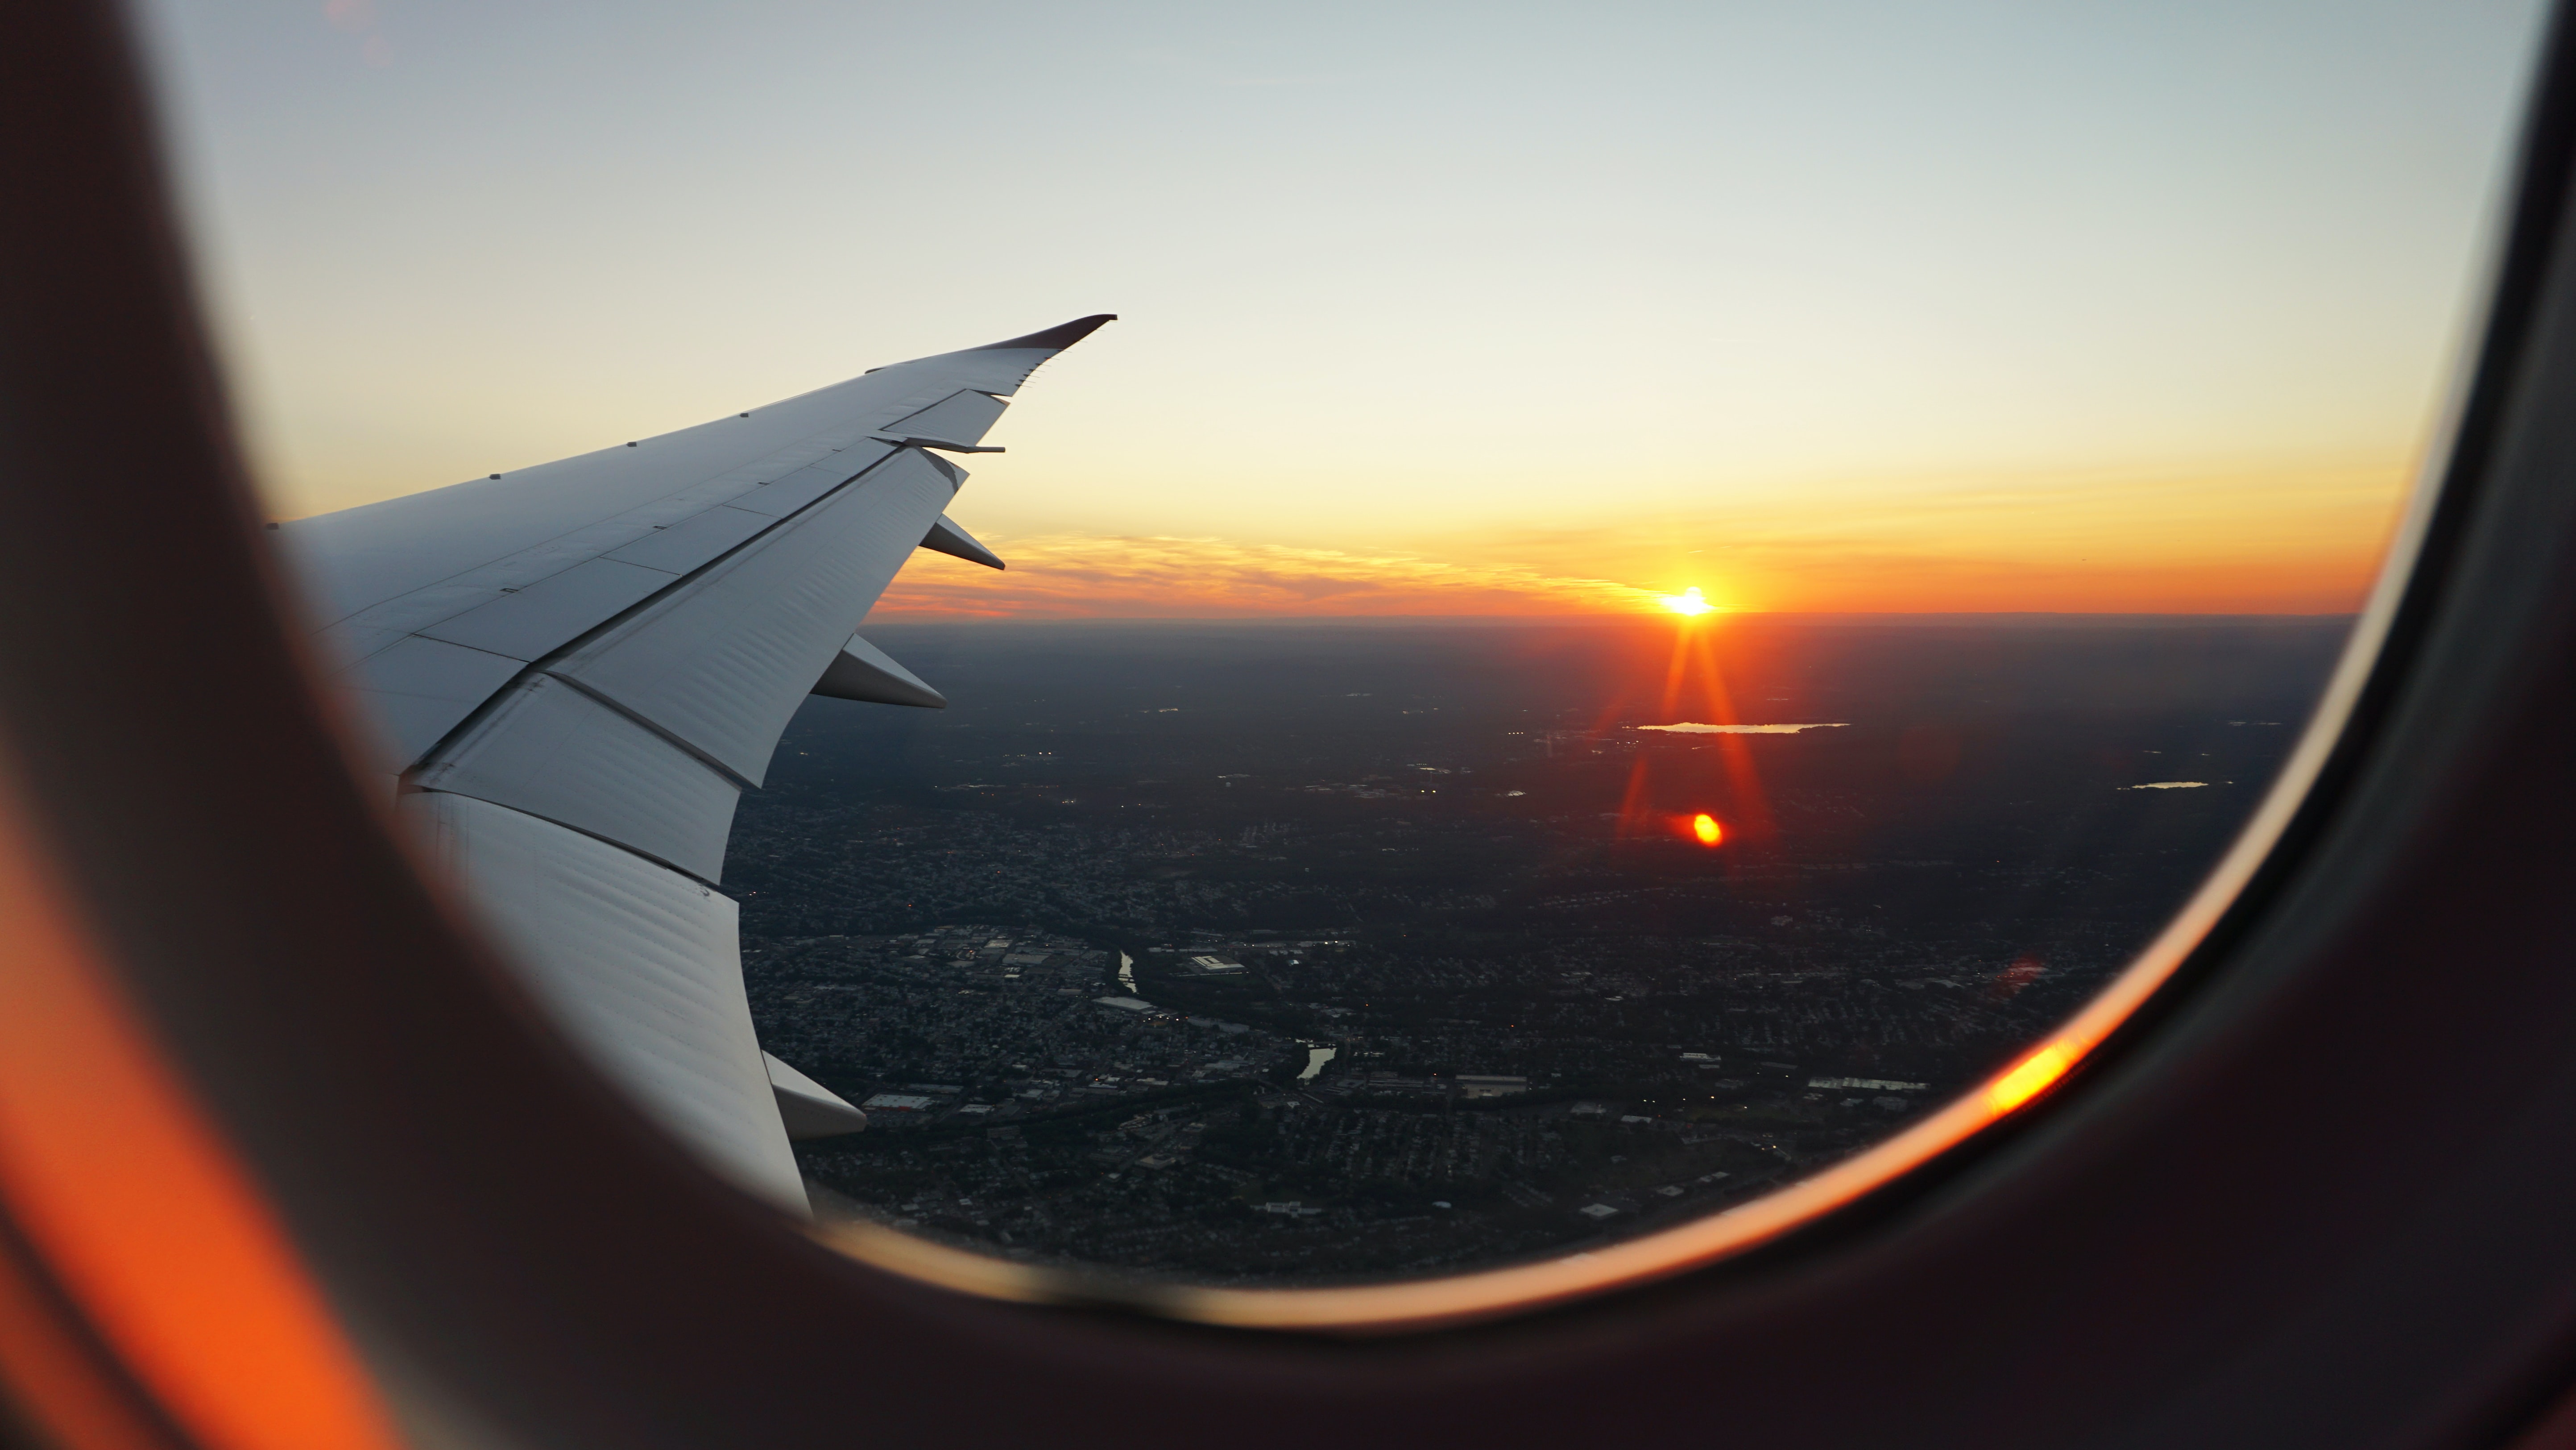 Airplane window view for airline loyalty passenger